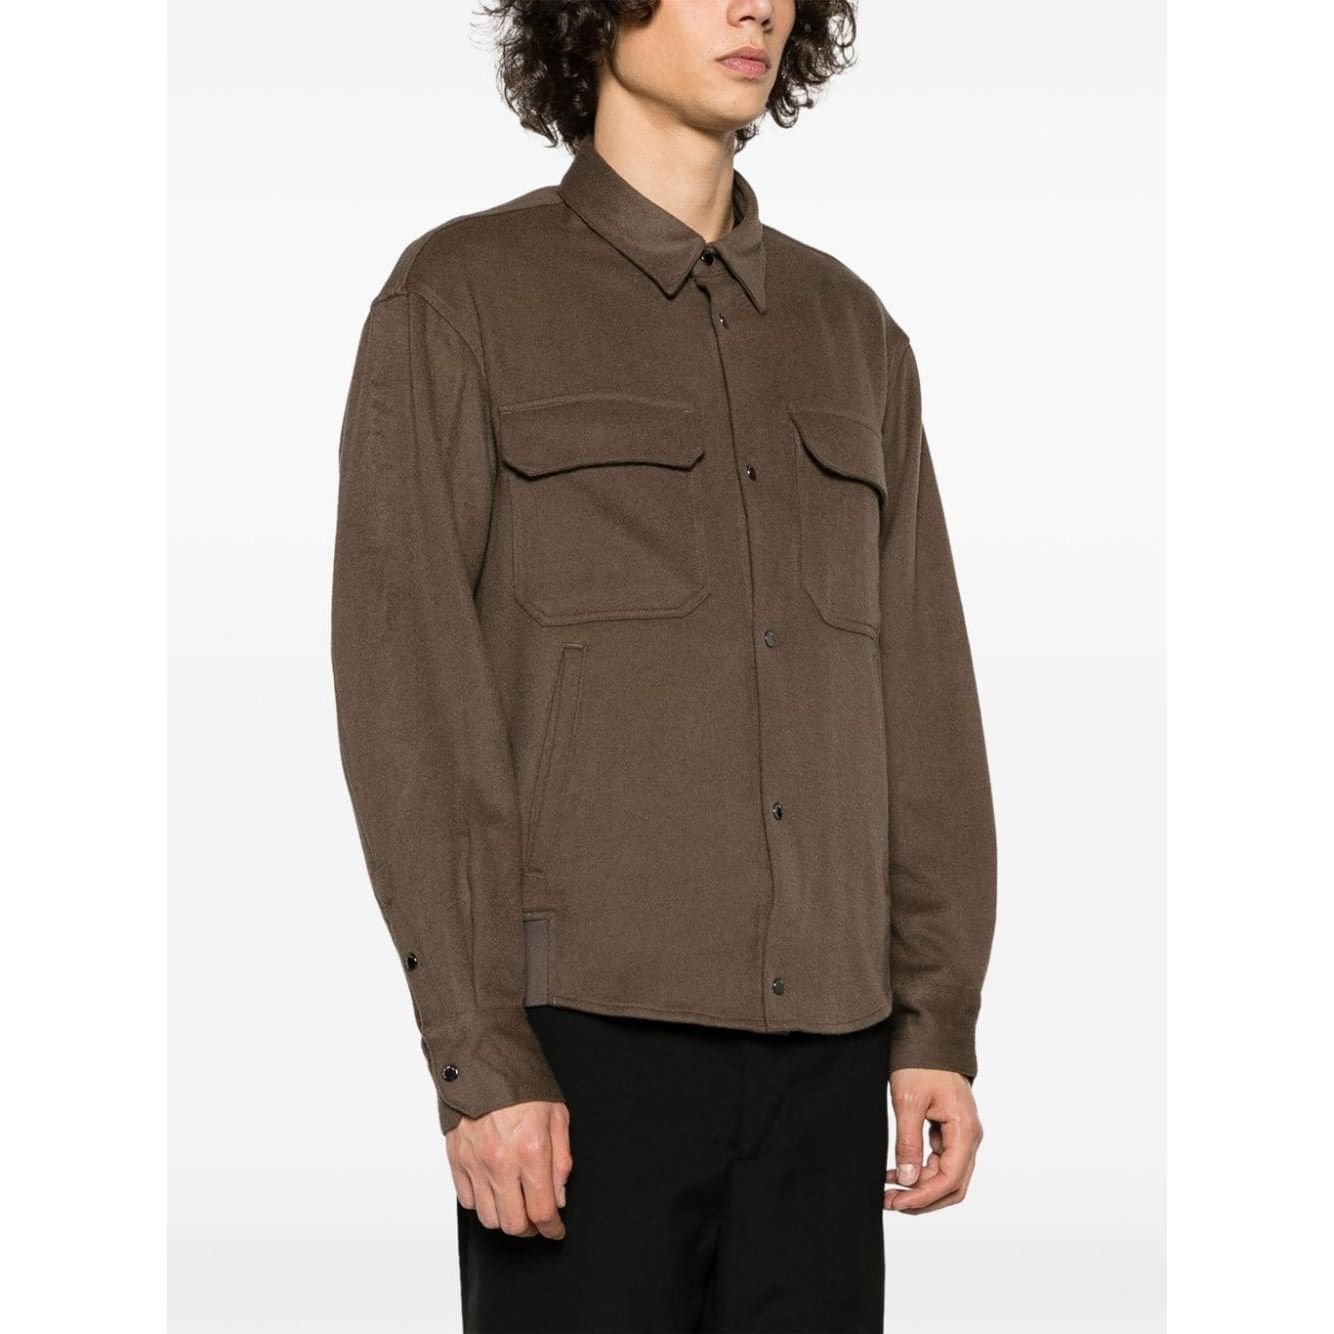 EMPORIO ARMANI CASHMERE WOOL CLOTH SHIRT JACKET WITH FRONT POCKETS - Yooto